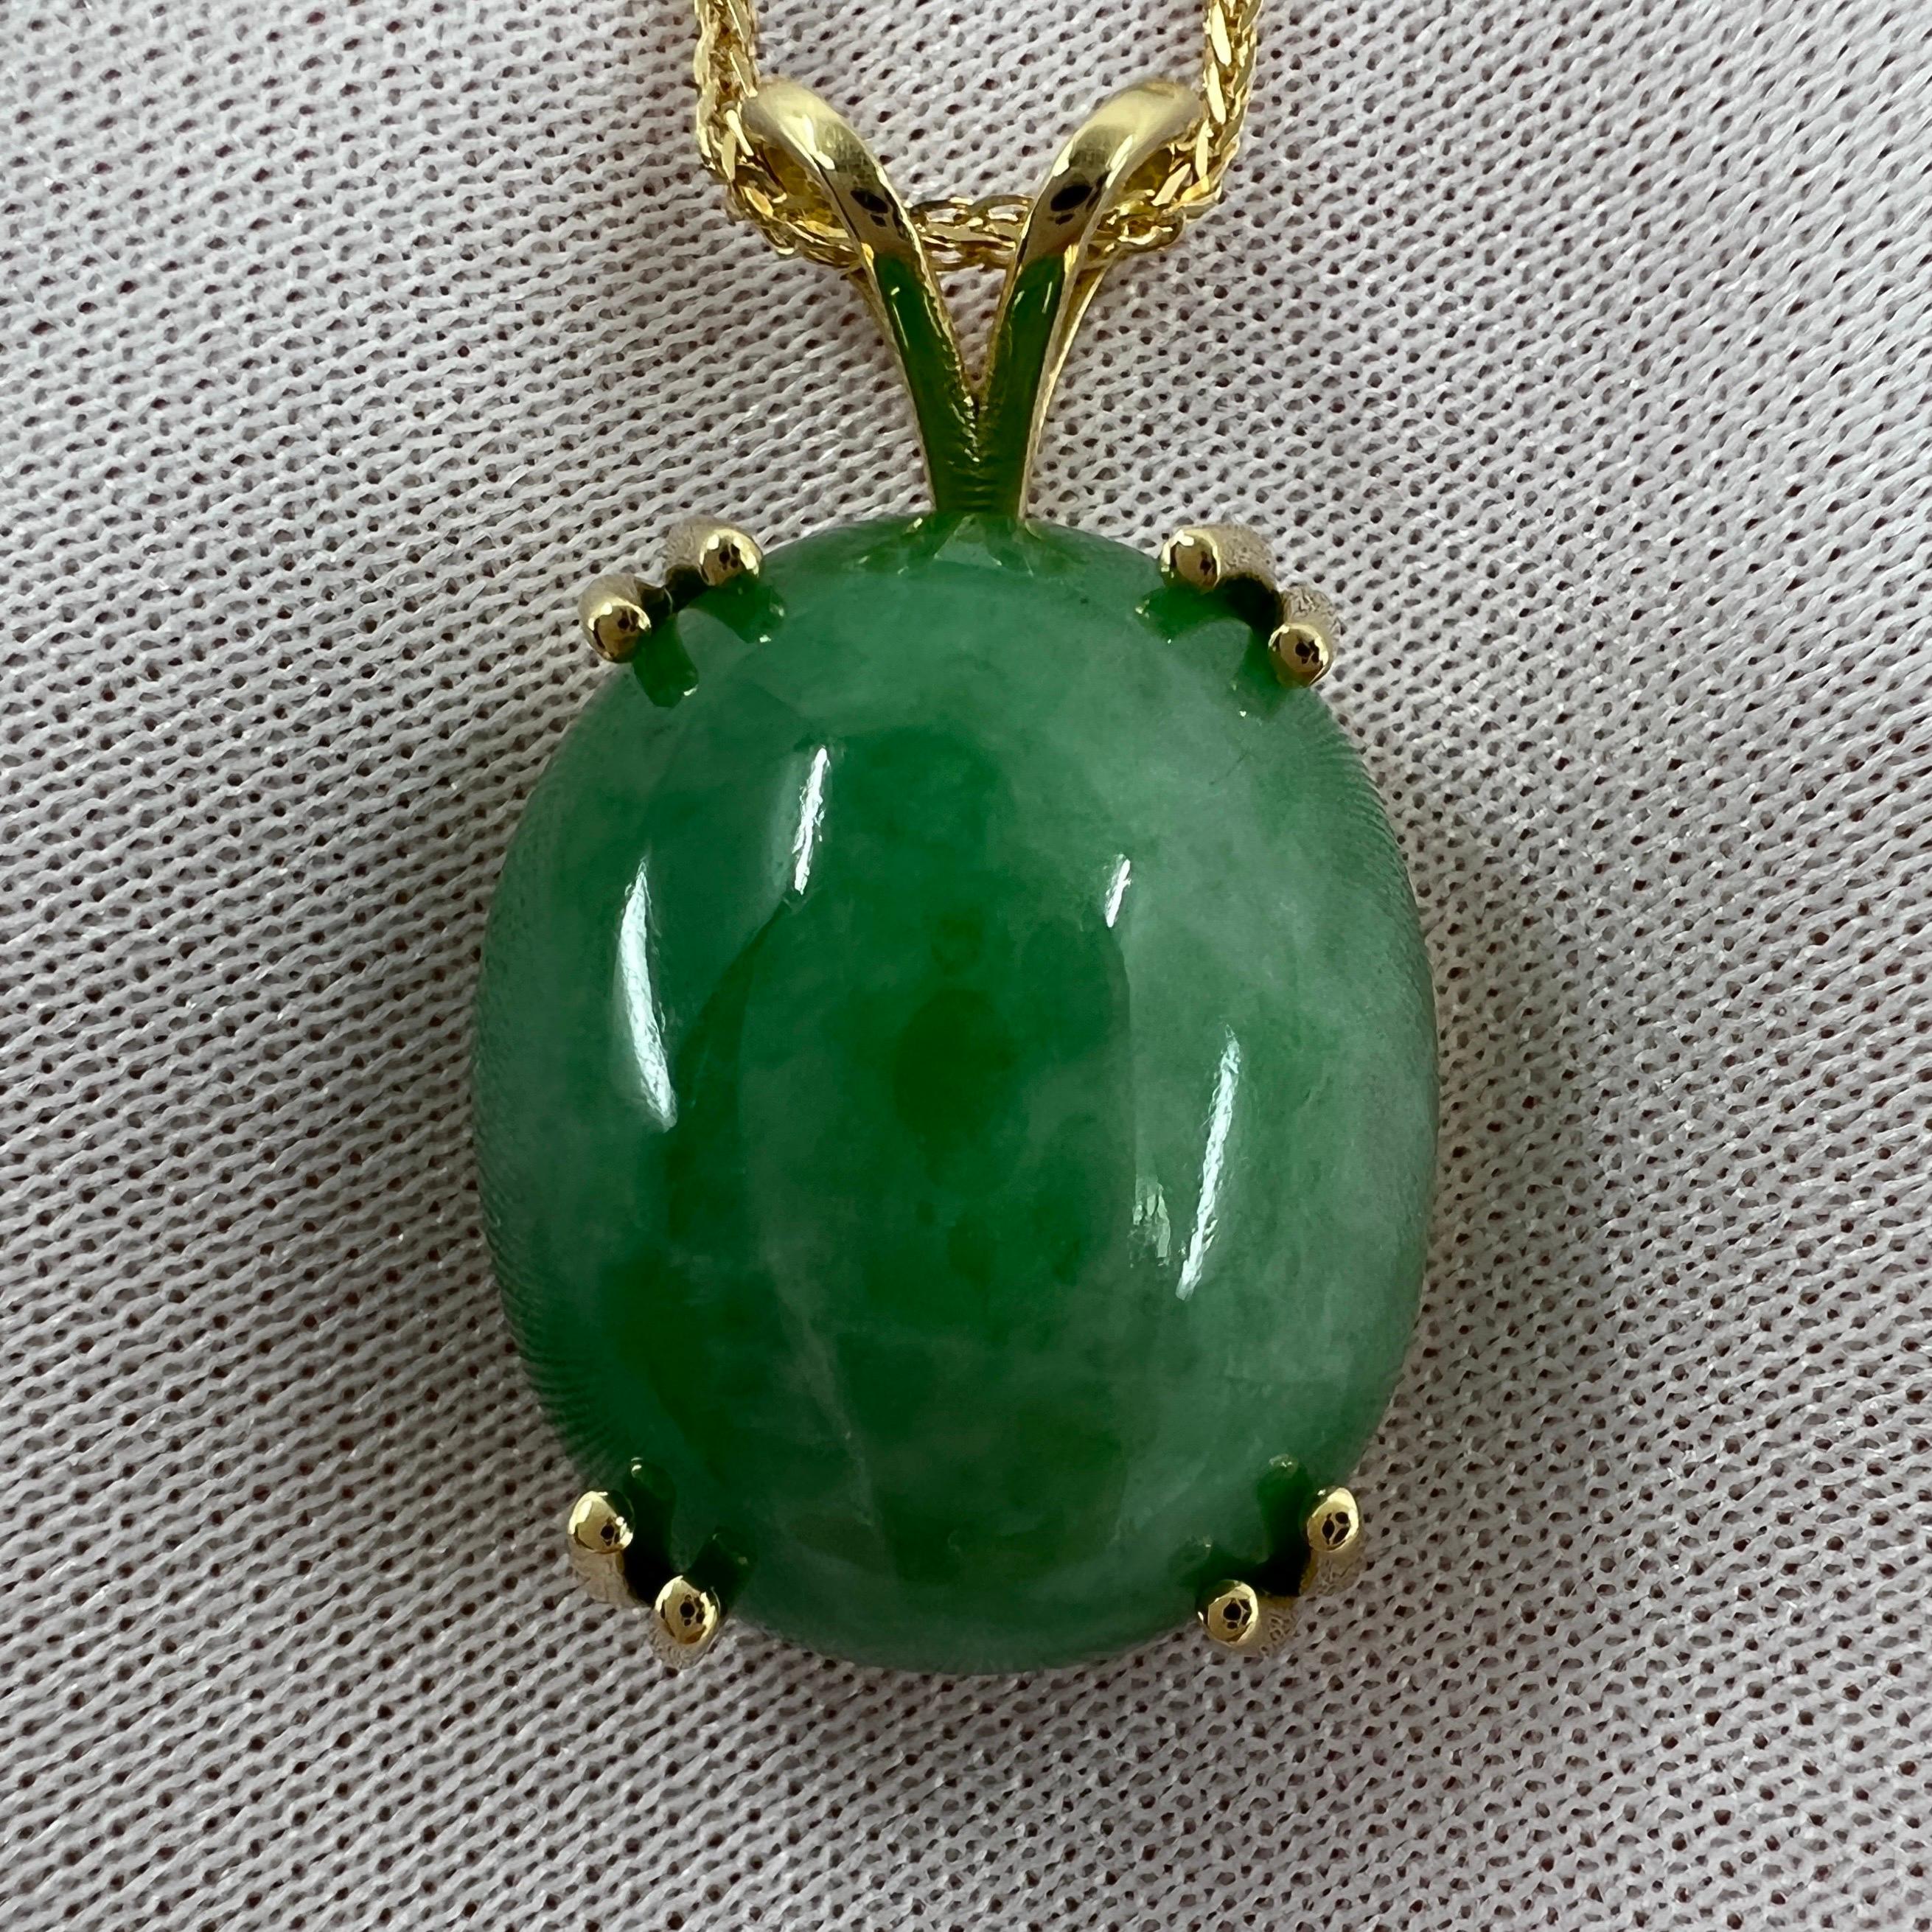 Cabochon 35.69ct GIA Certified Untreated Jadeite Jade A Grade 18k Yellow Gold Pendant For Sale